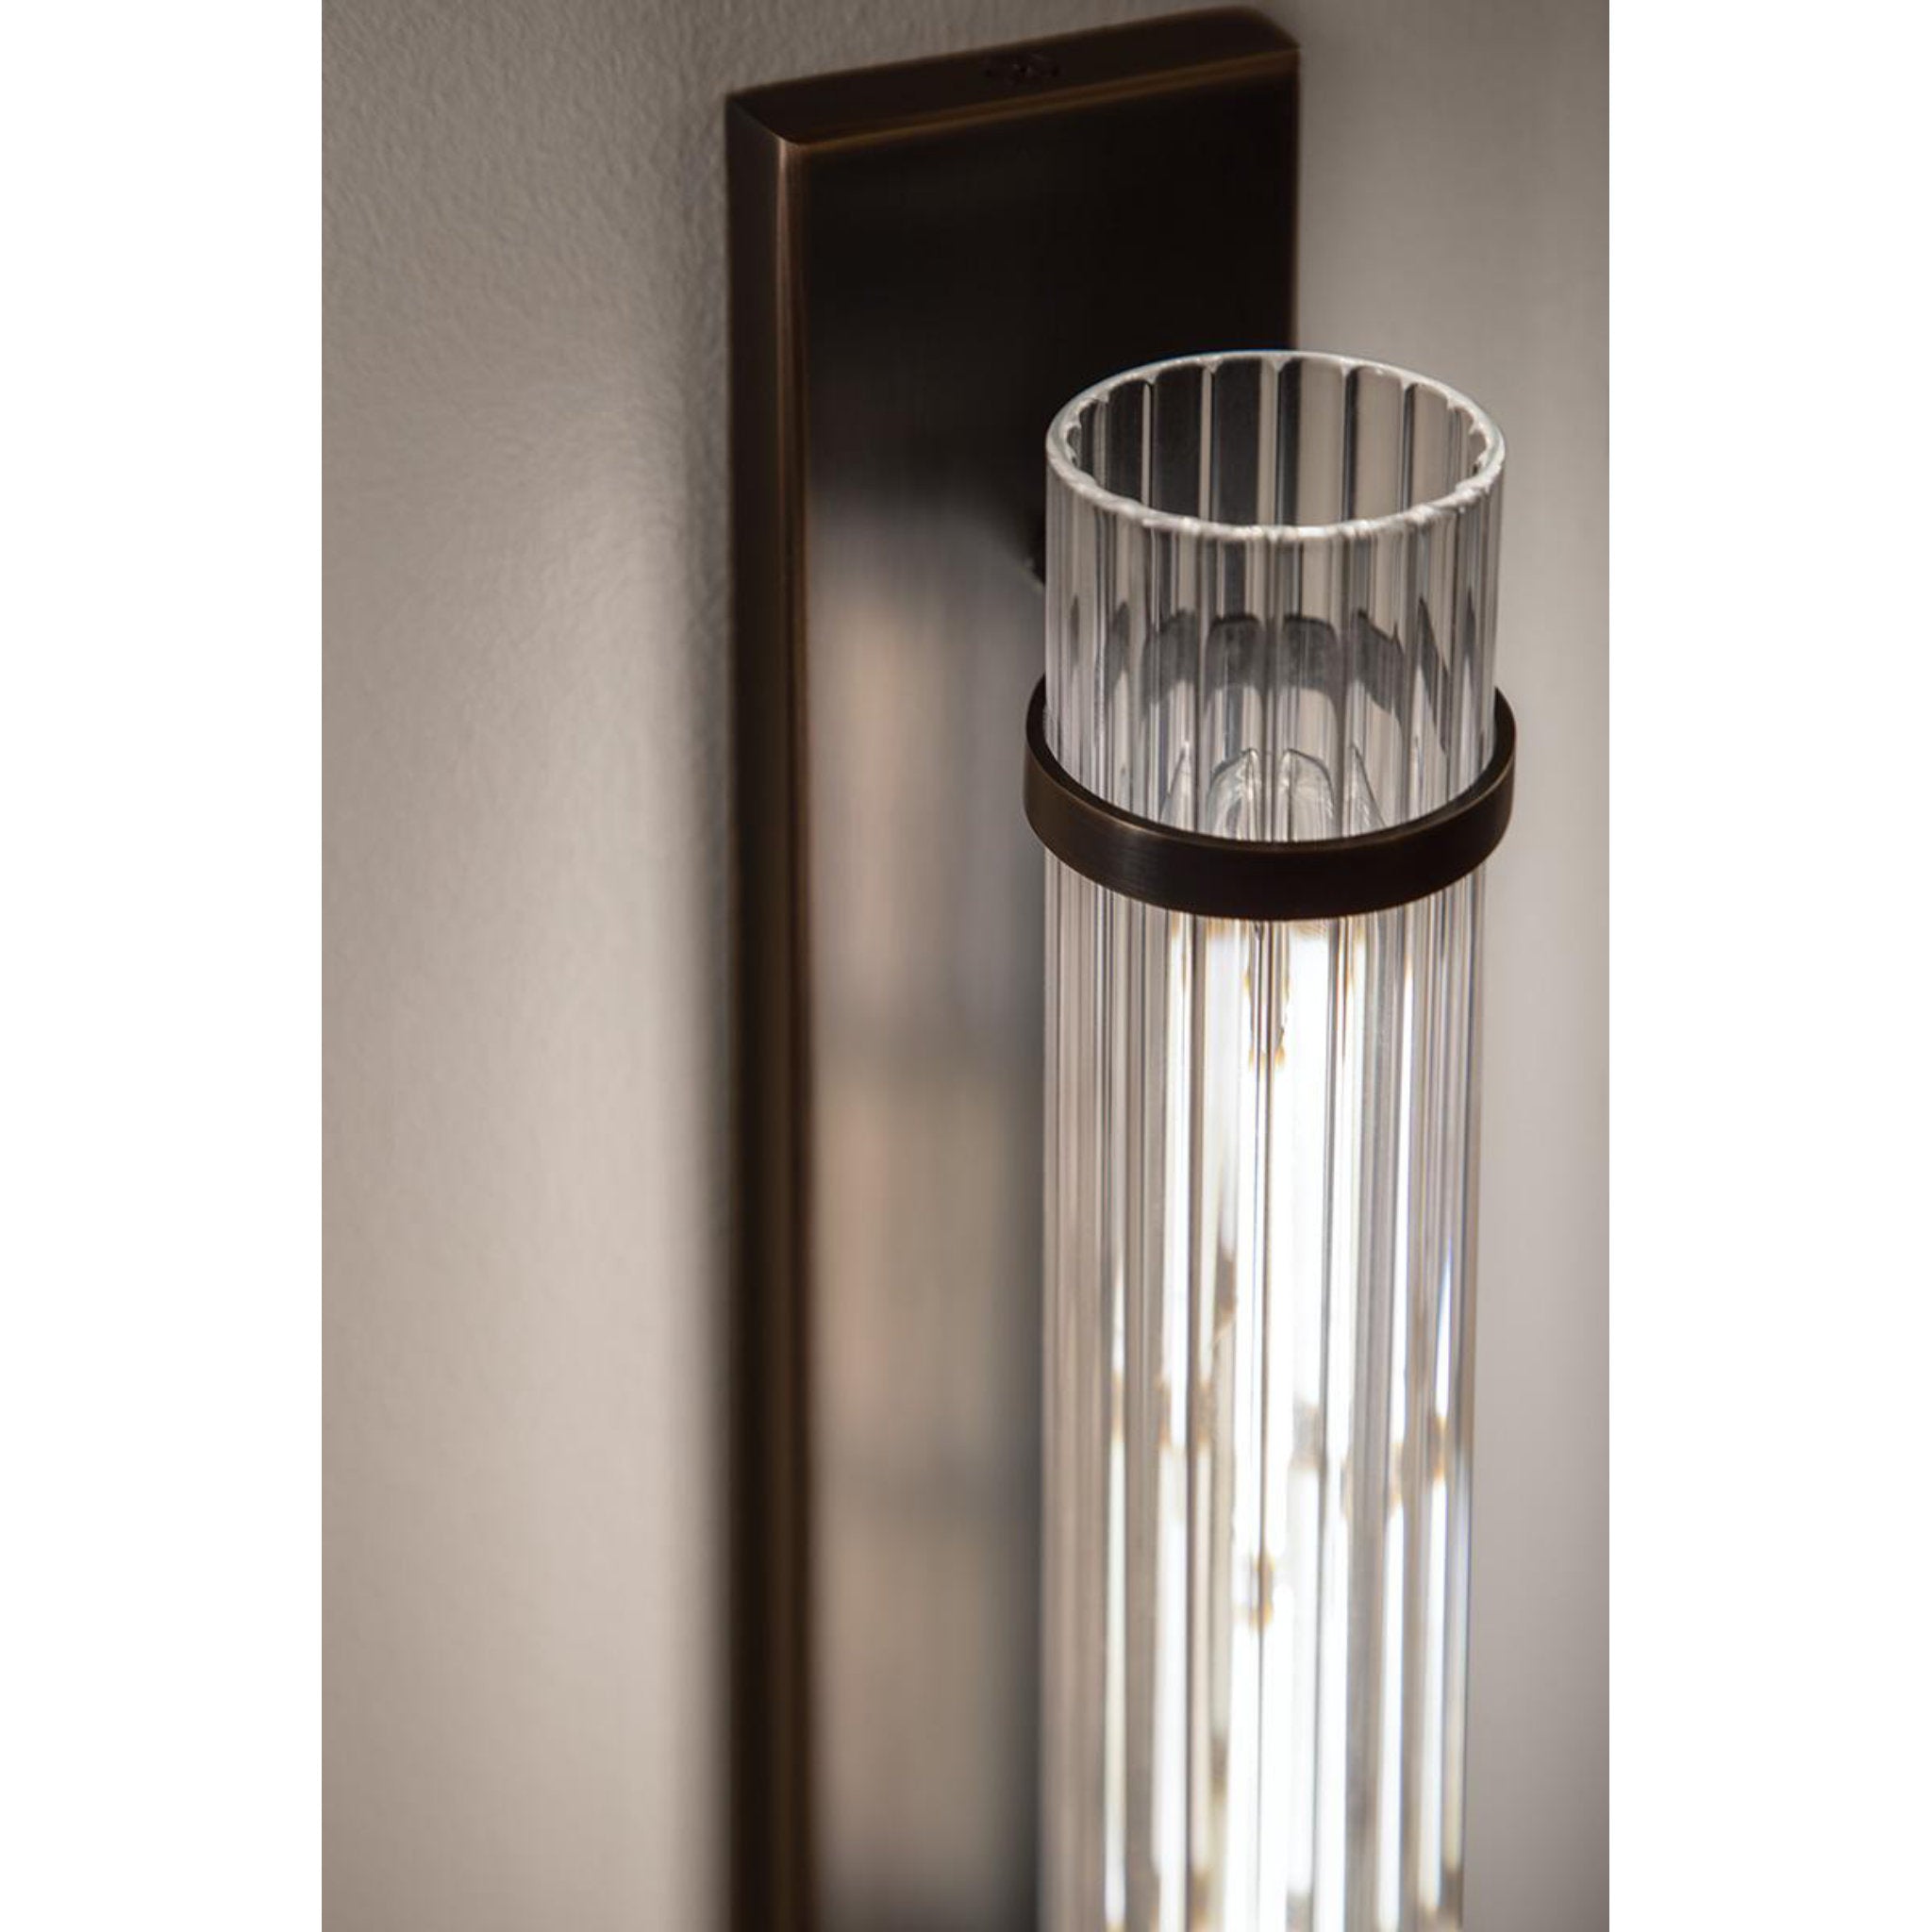 Shaw 1 Light Wall Sconce in Polished Nickel